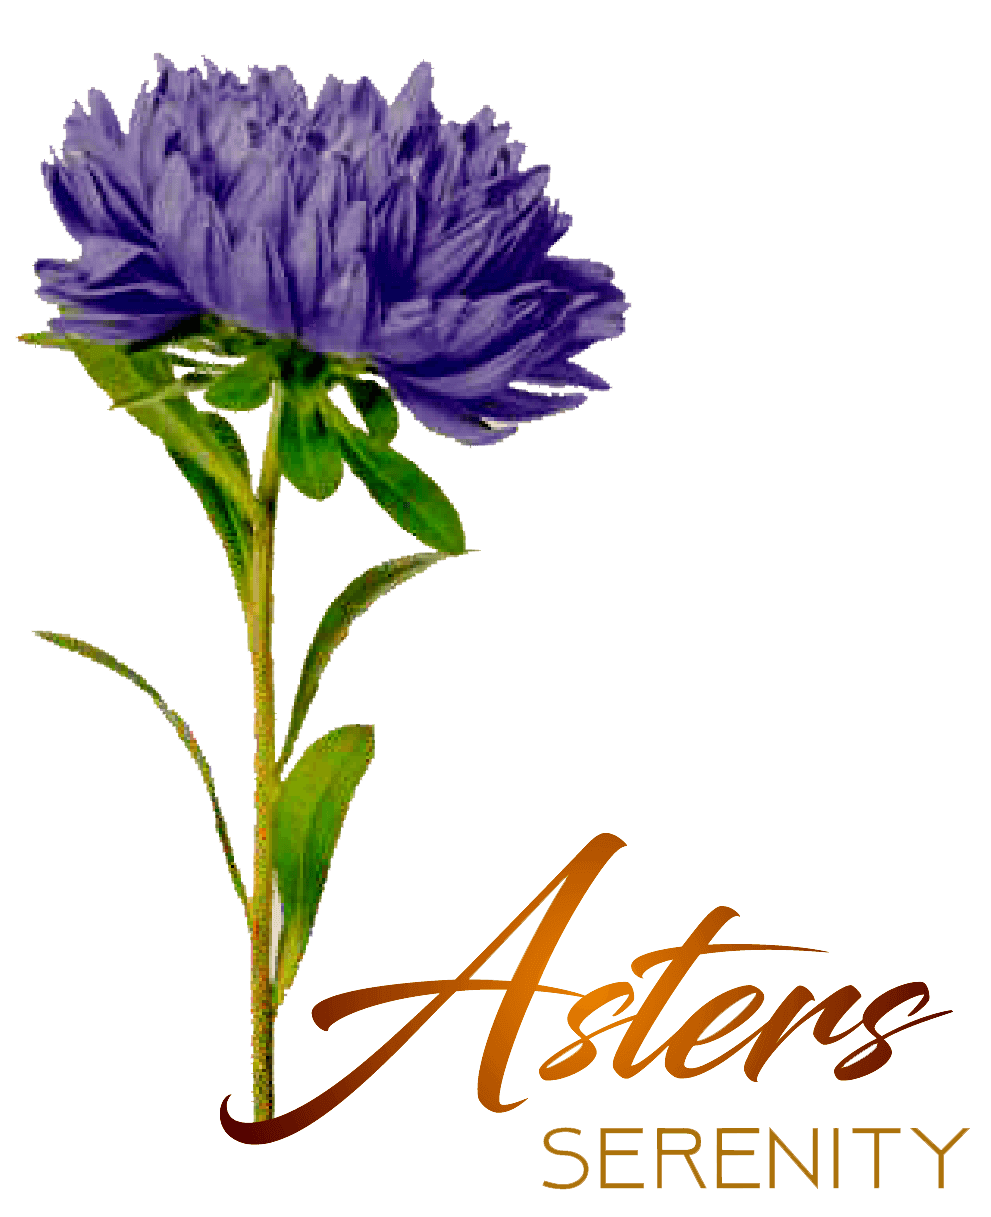 Aster